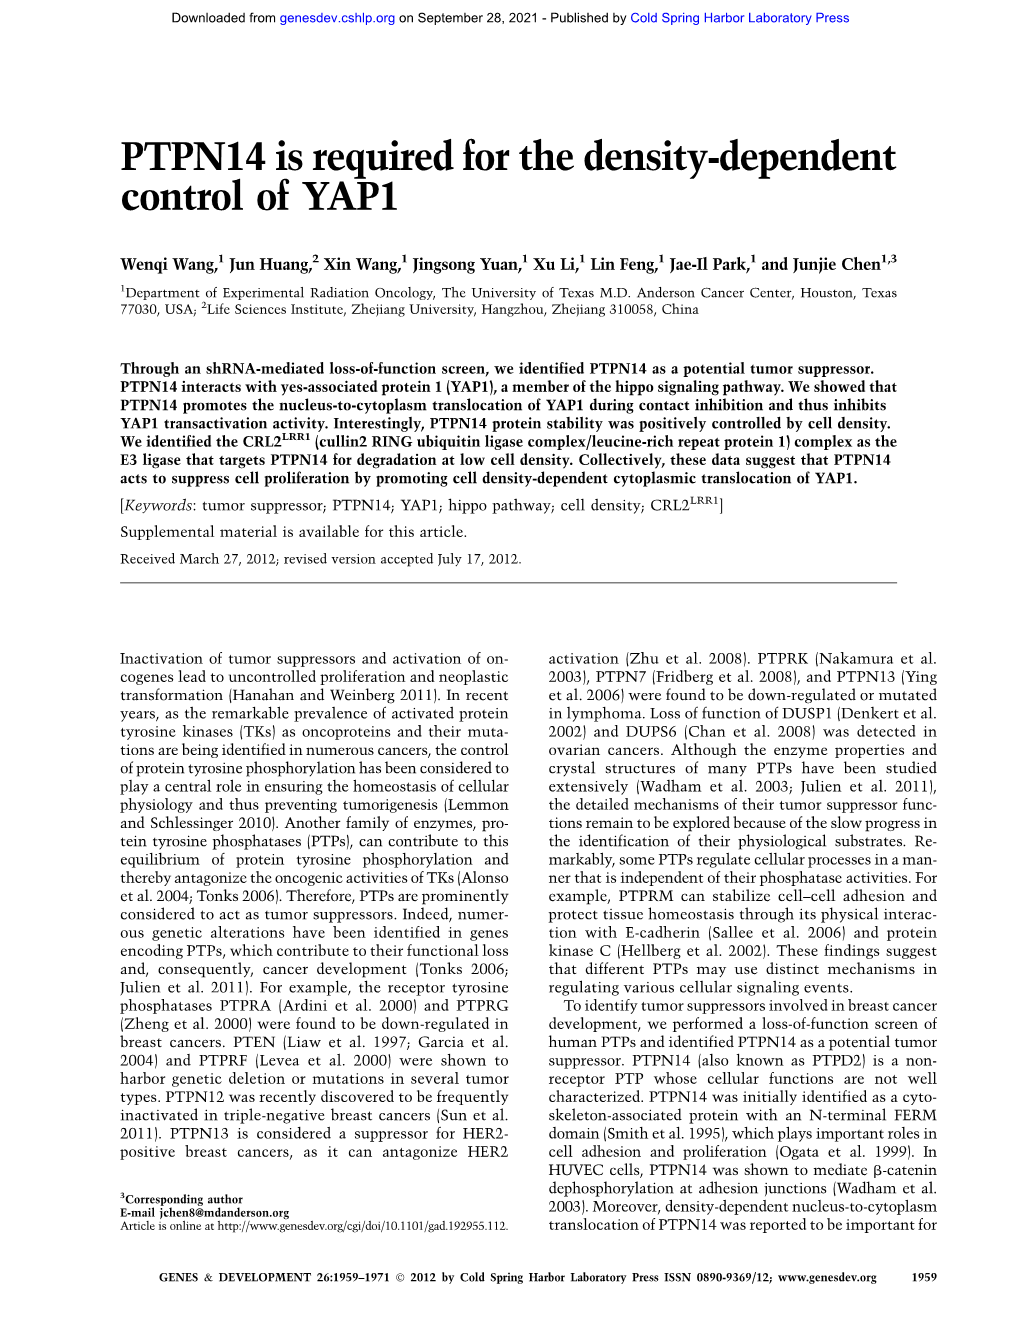 PTPN14 Is Required for the Density-Dependent Control of YAP1